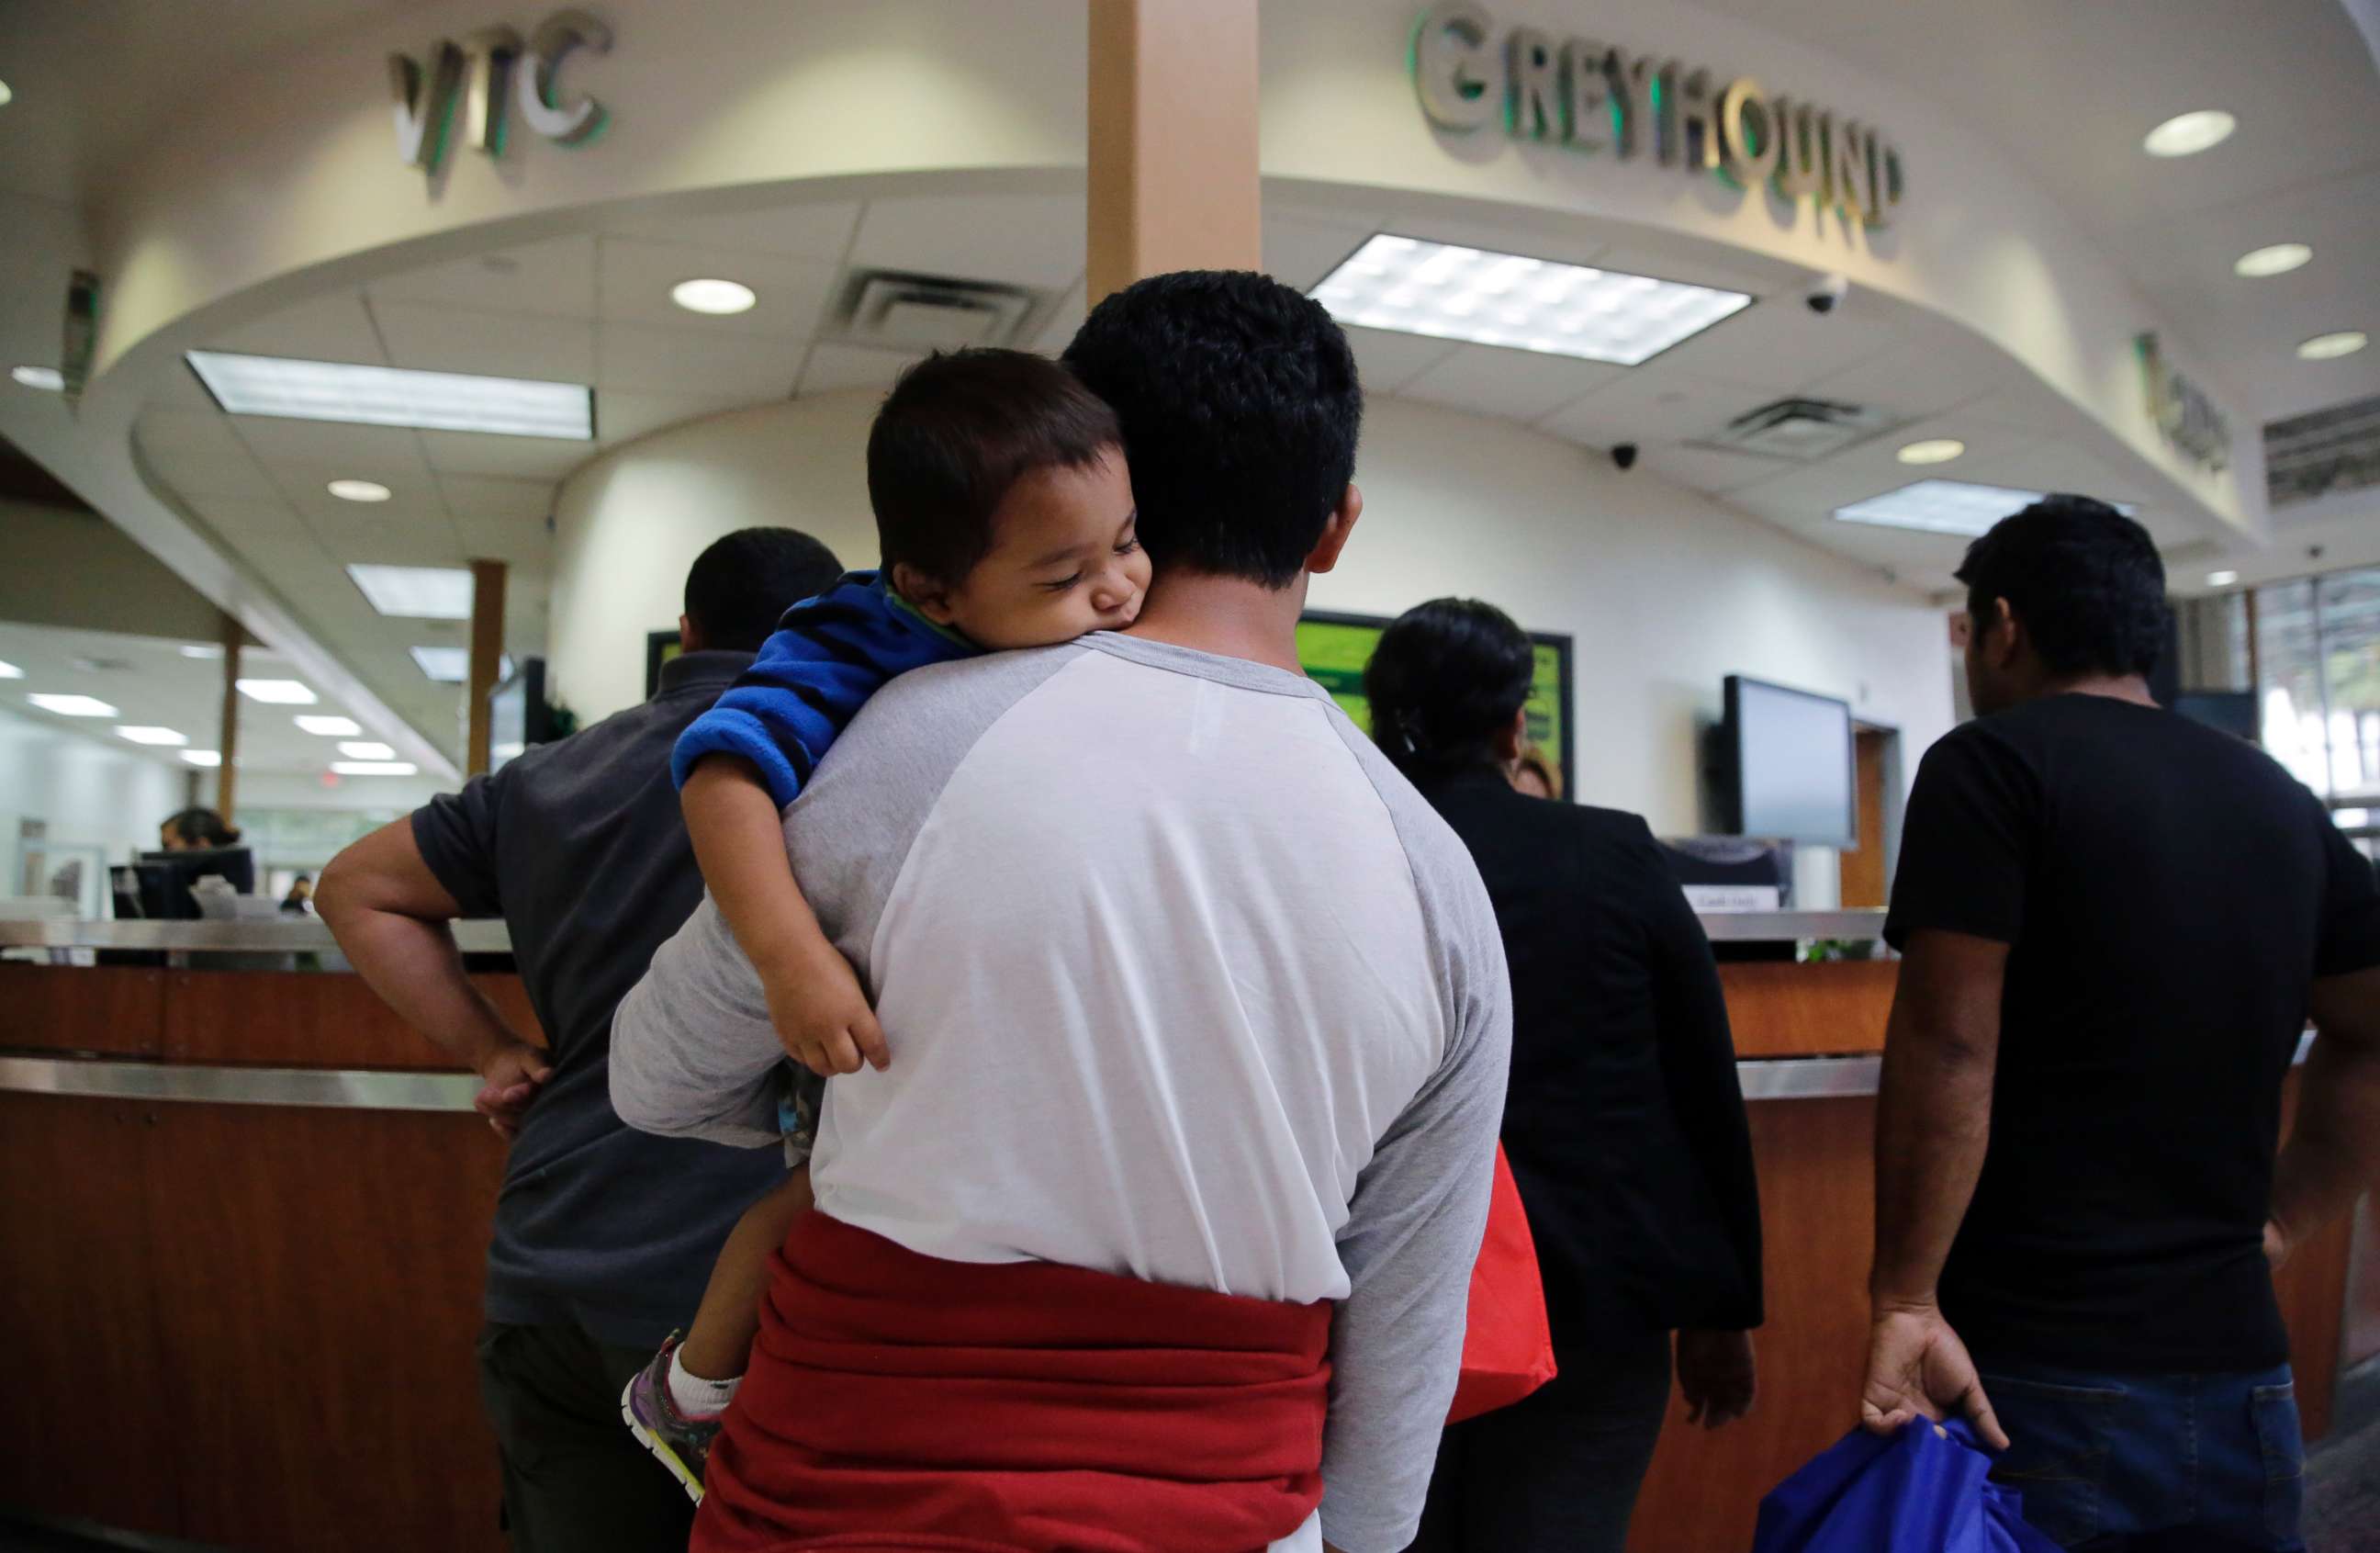 PHOTO: A group of immigrants from Honduras and Guatemala seeking asylum stand in line at the bus station after they were processed and released by U.S. Customs and Border Protection, June 21, 2018, in McAllen, Texas.